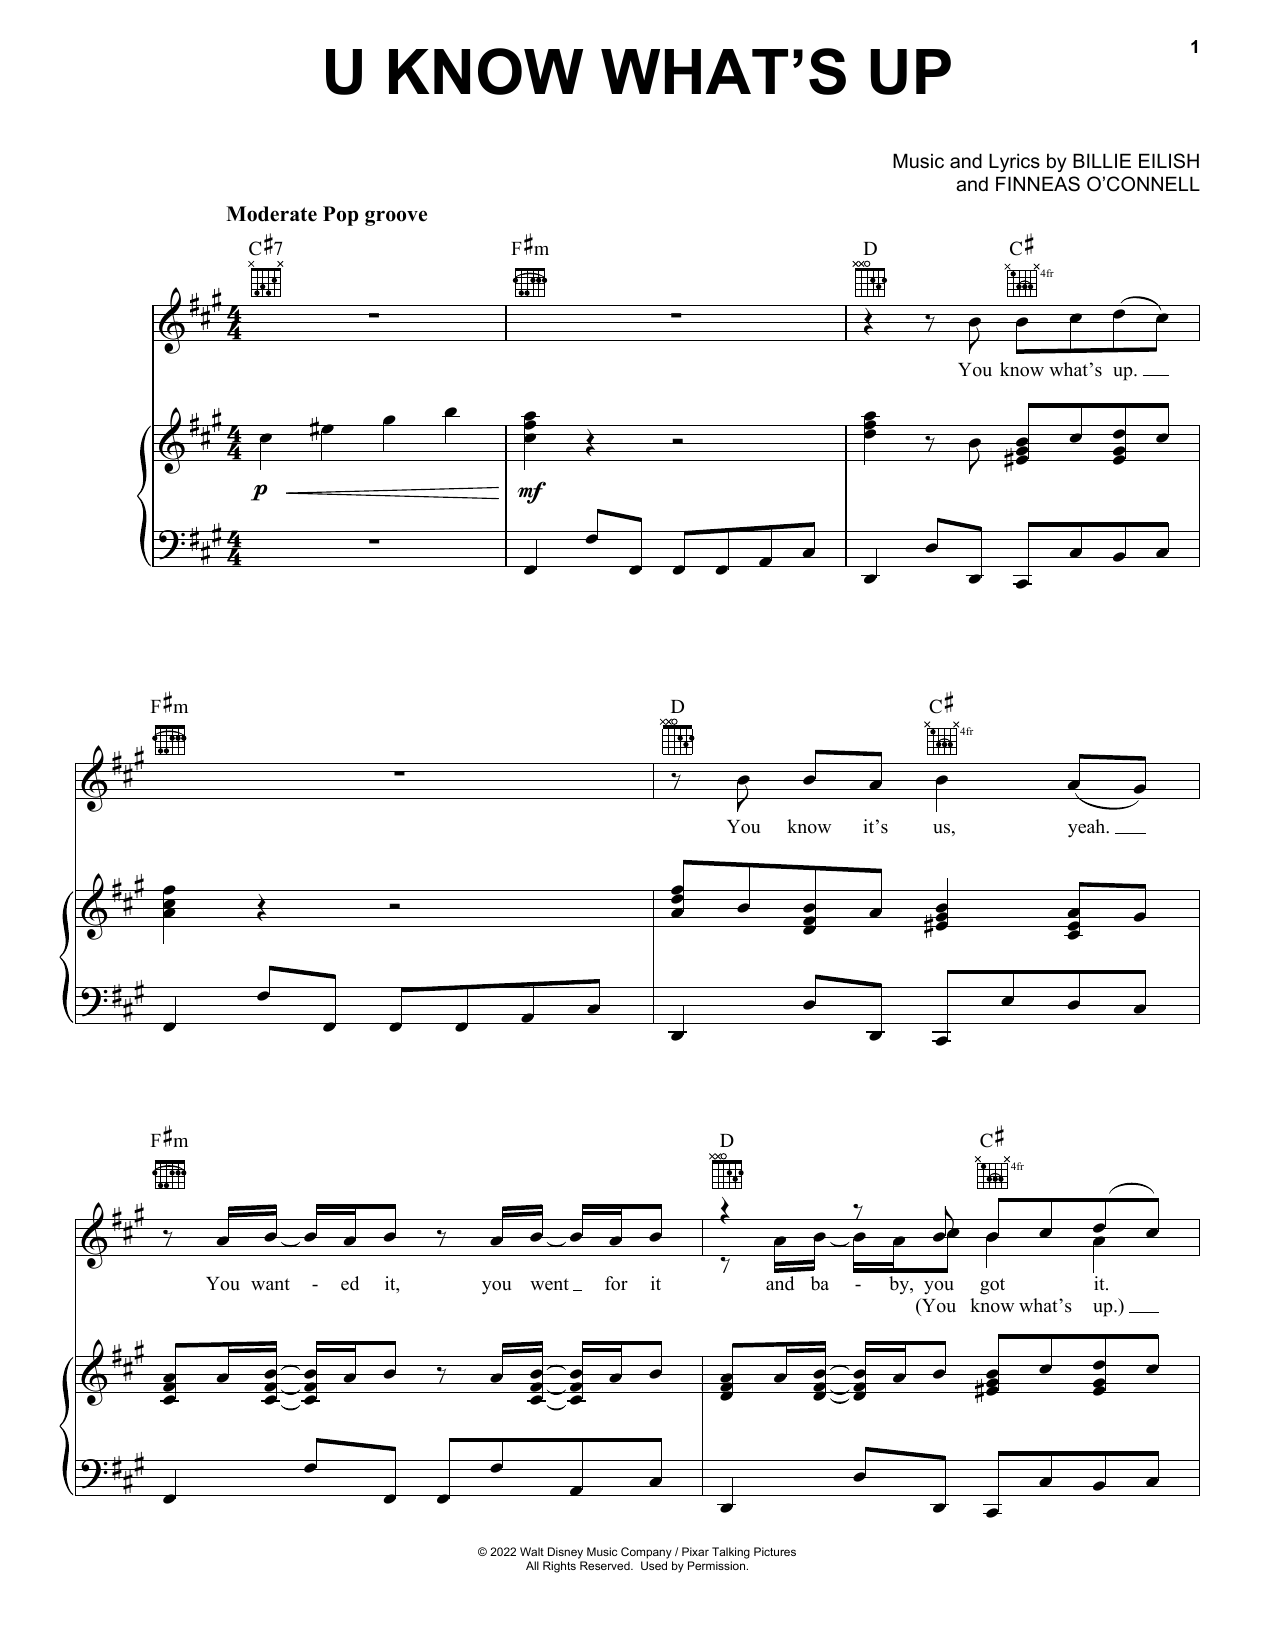 4*TOWN U Know What's Up (from Turning Red) sheet music notes and chords. Download Printable PDF.